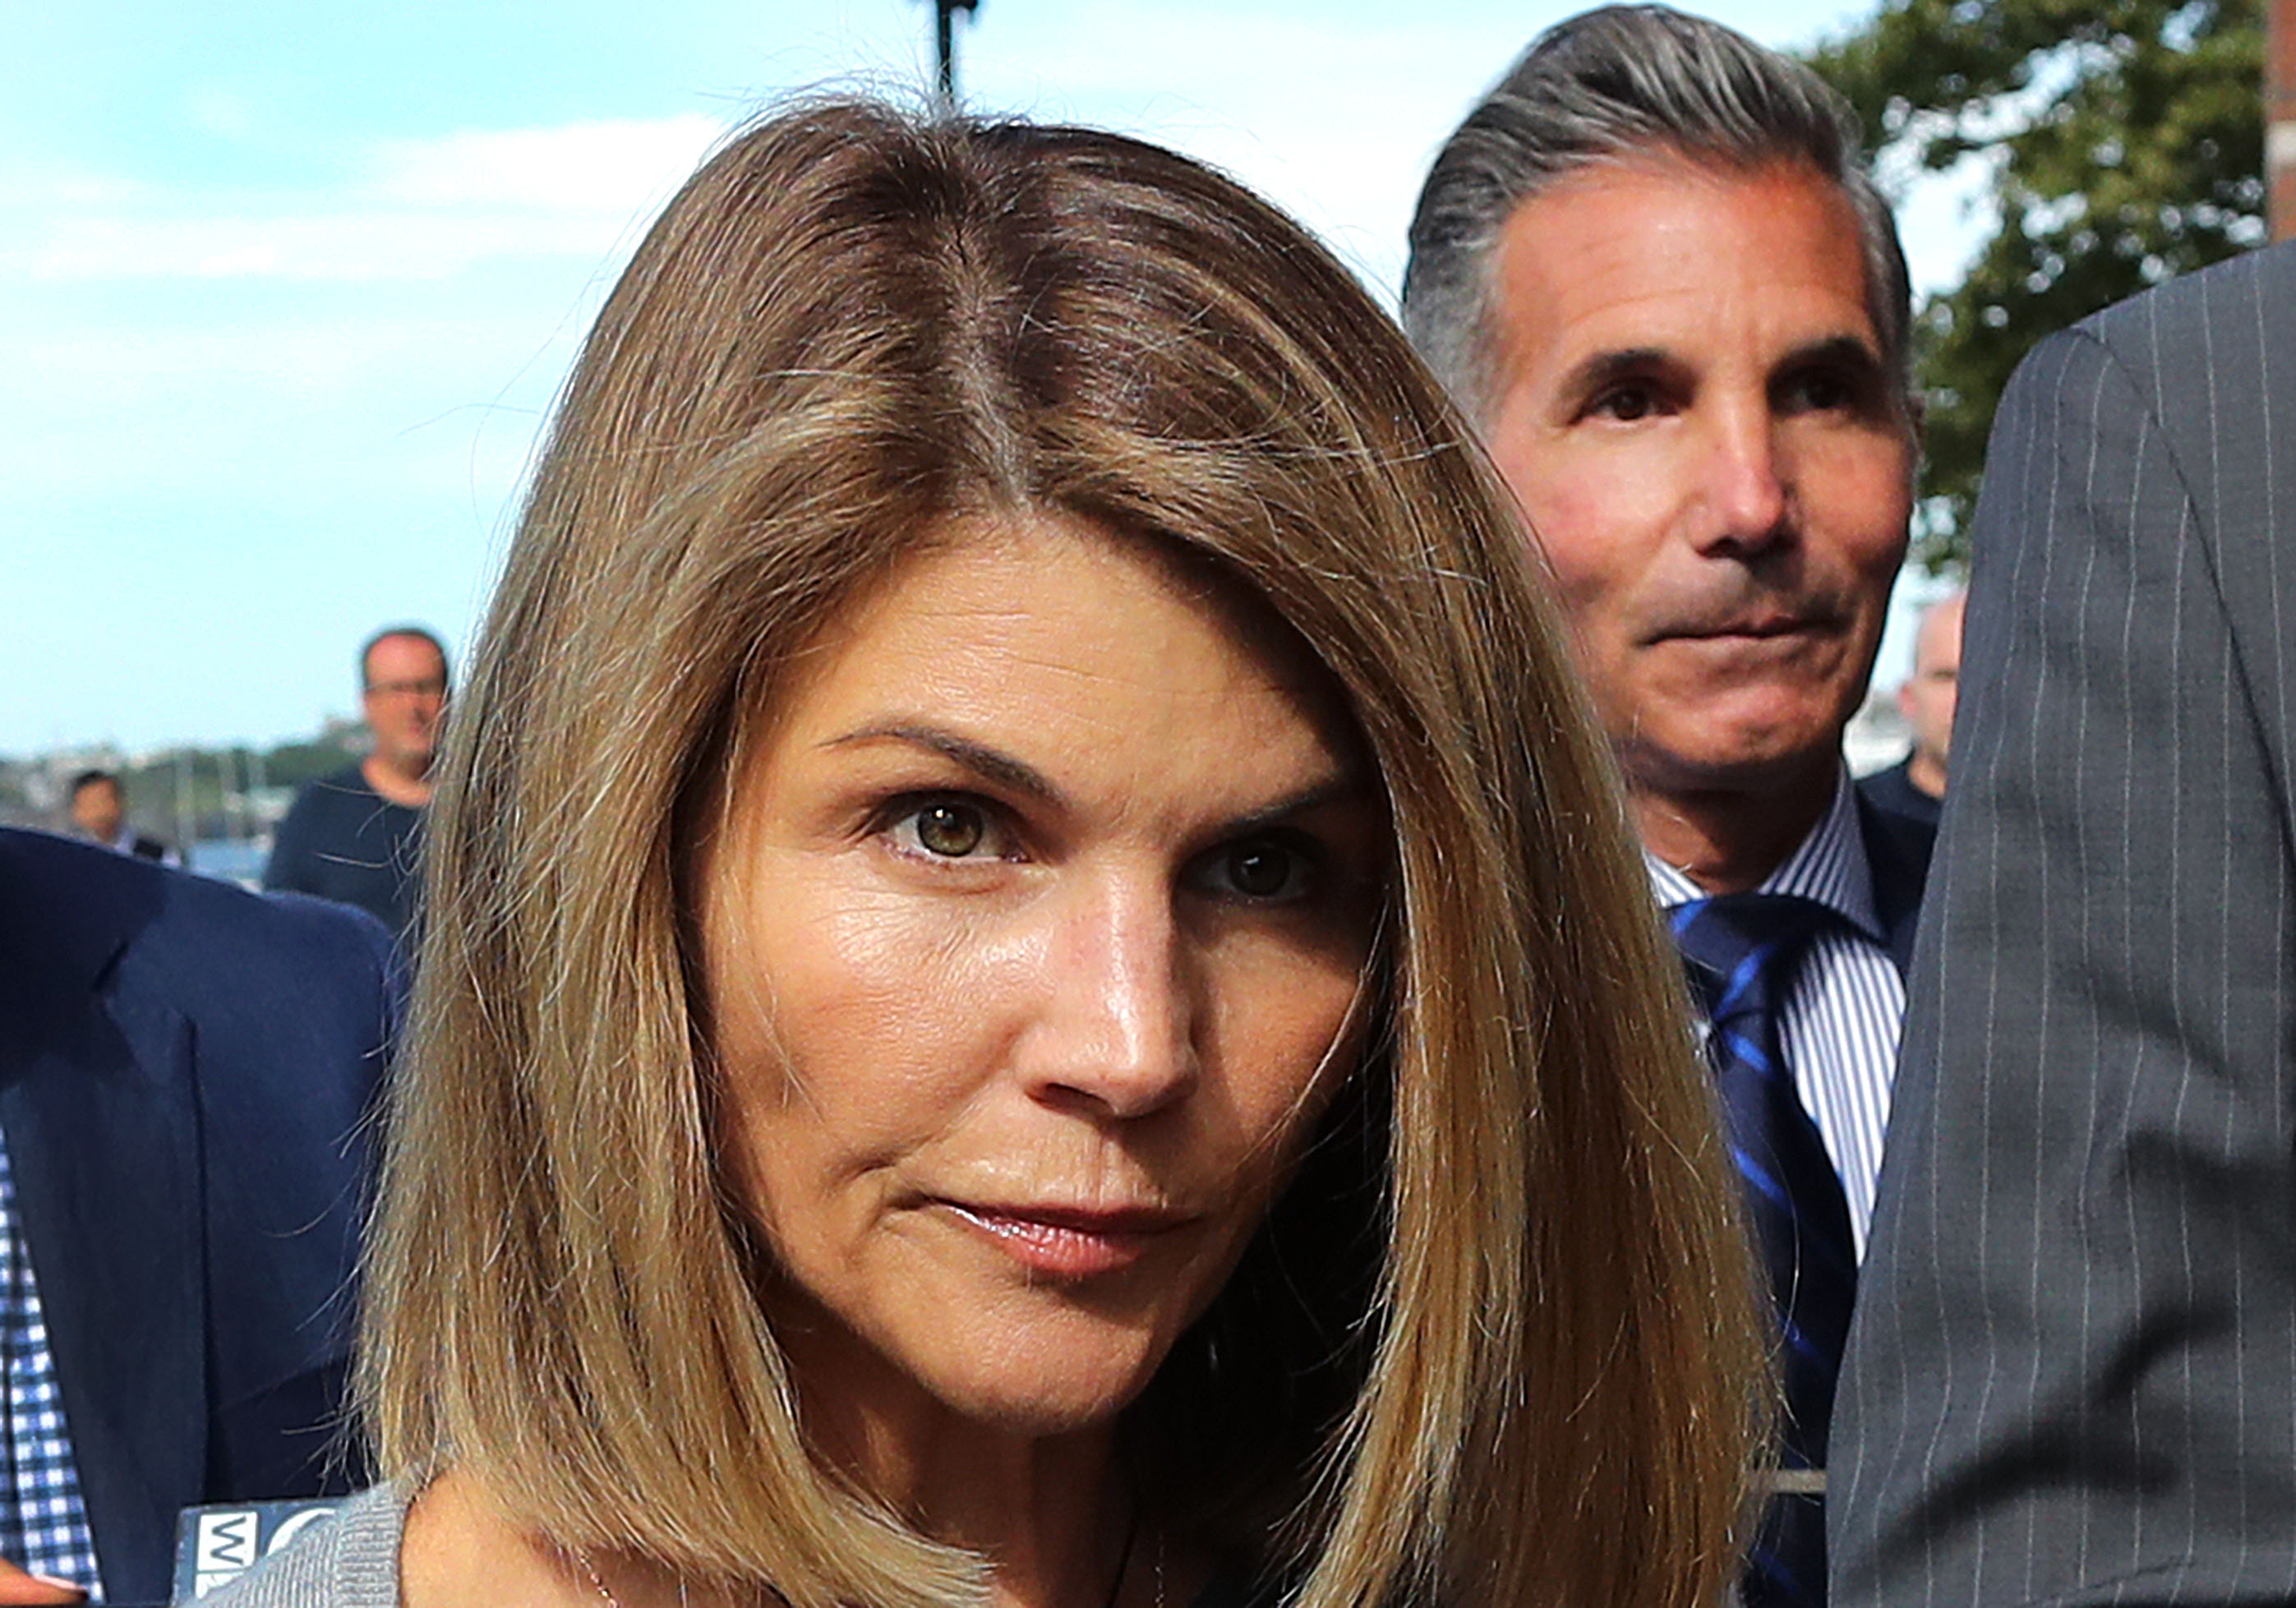 Lori Loughlin, with Mossimo Giannulli behind her